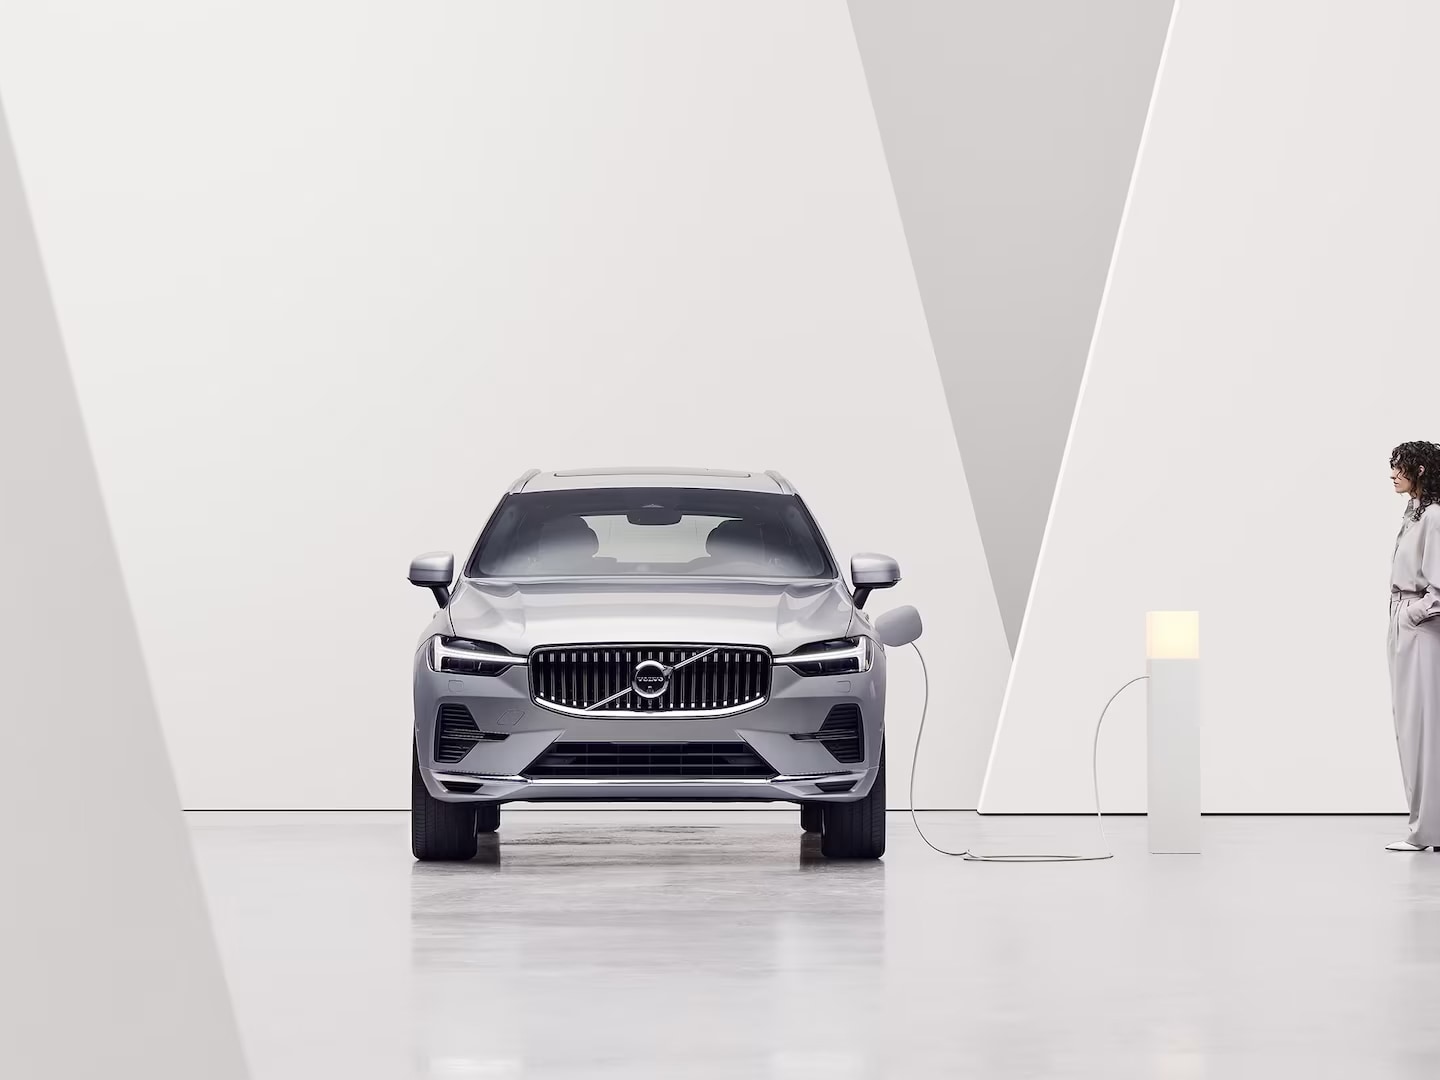 A Volvo XC60 Recharge plugged into a charging pole, being charged.